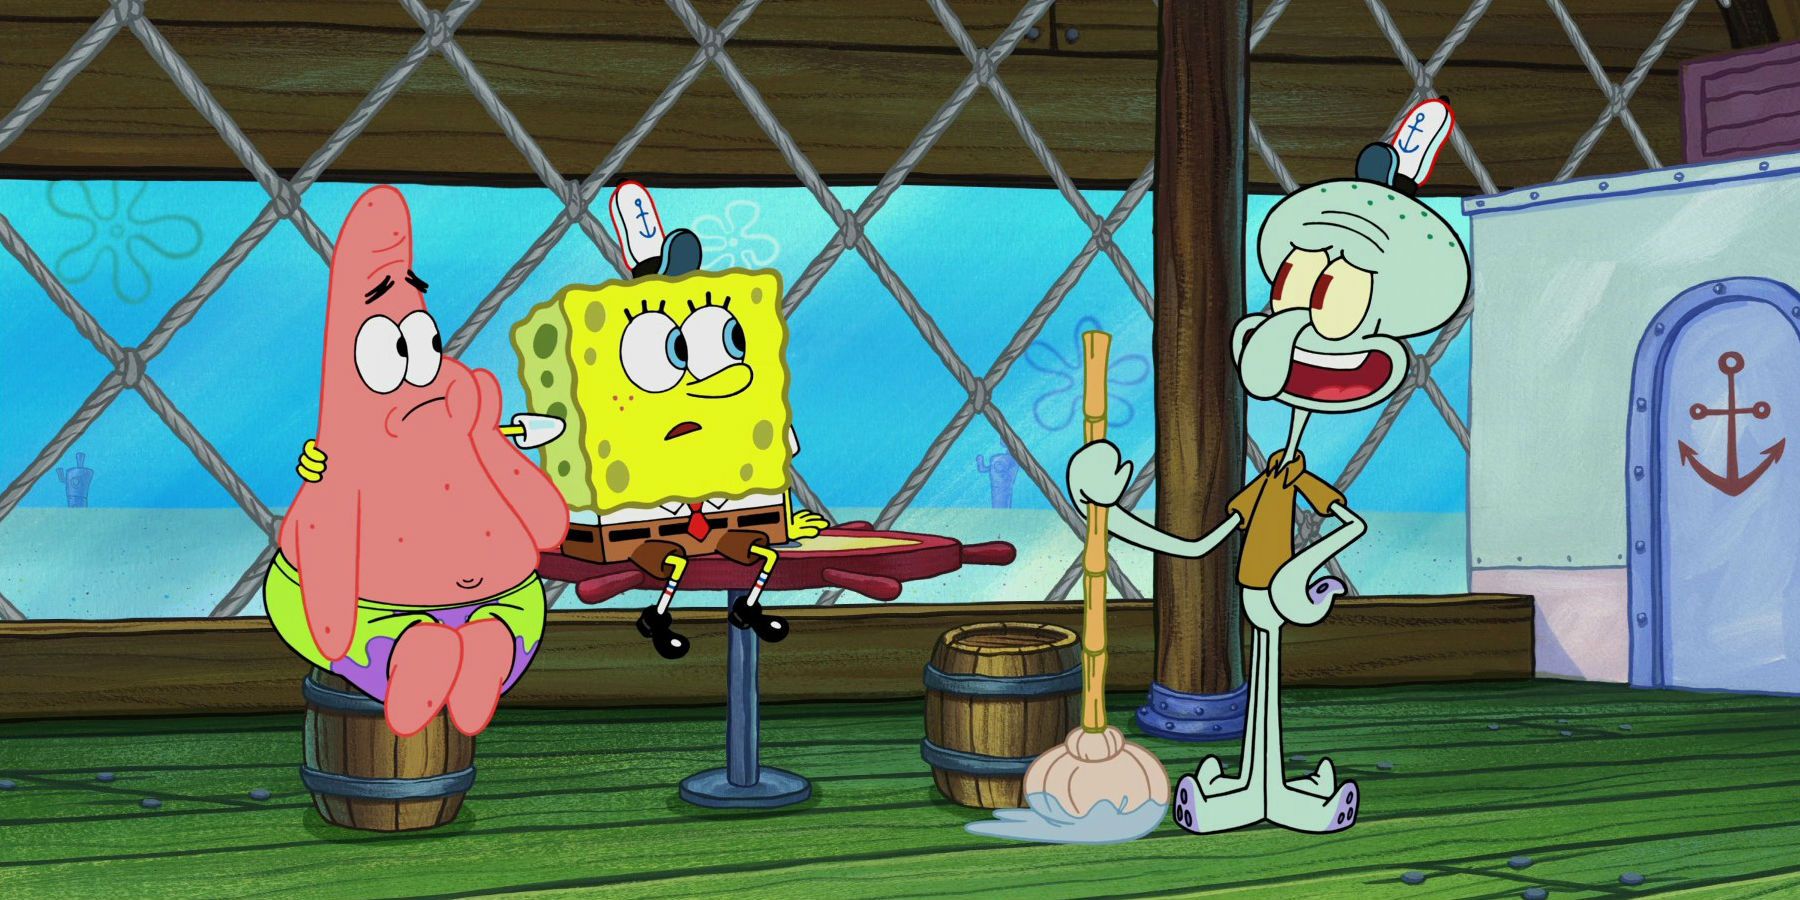 Squidward talking to SpoingeBob and Patrick.